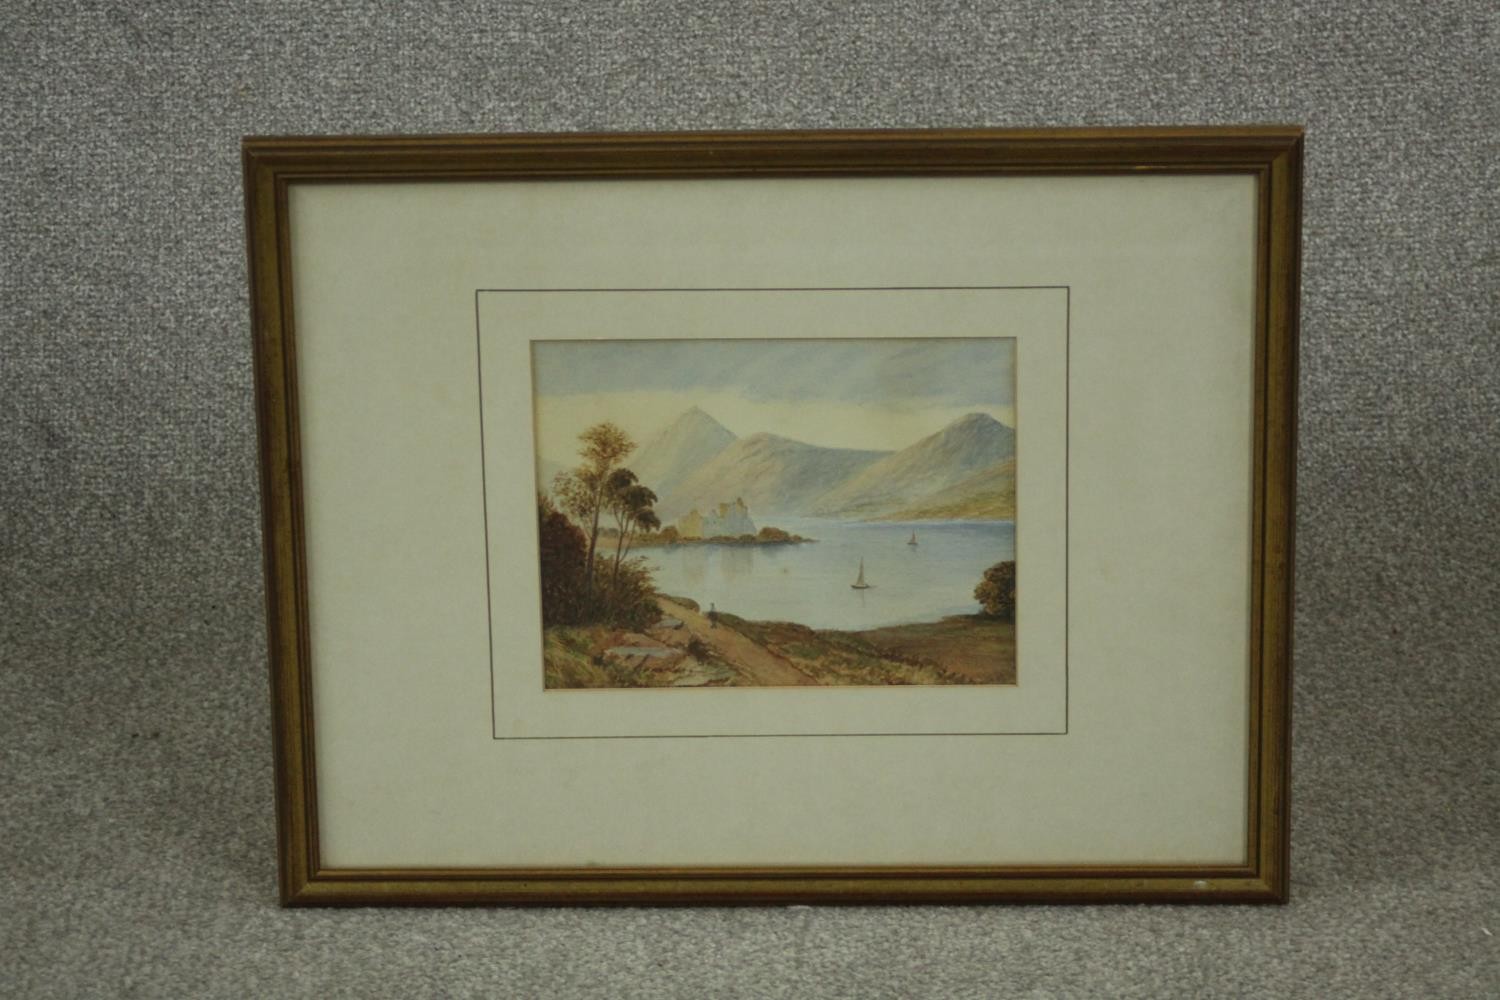 A framed and glazed 19th century watercolour of a lake scene with mountains in the distance, - Image 2 of 7